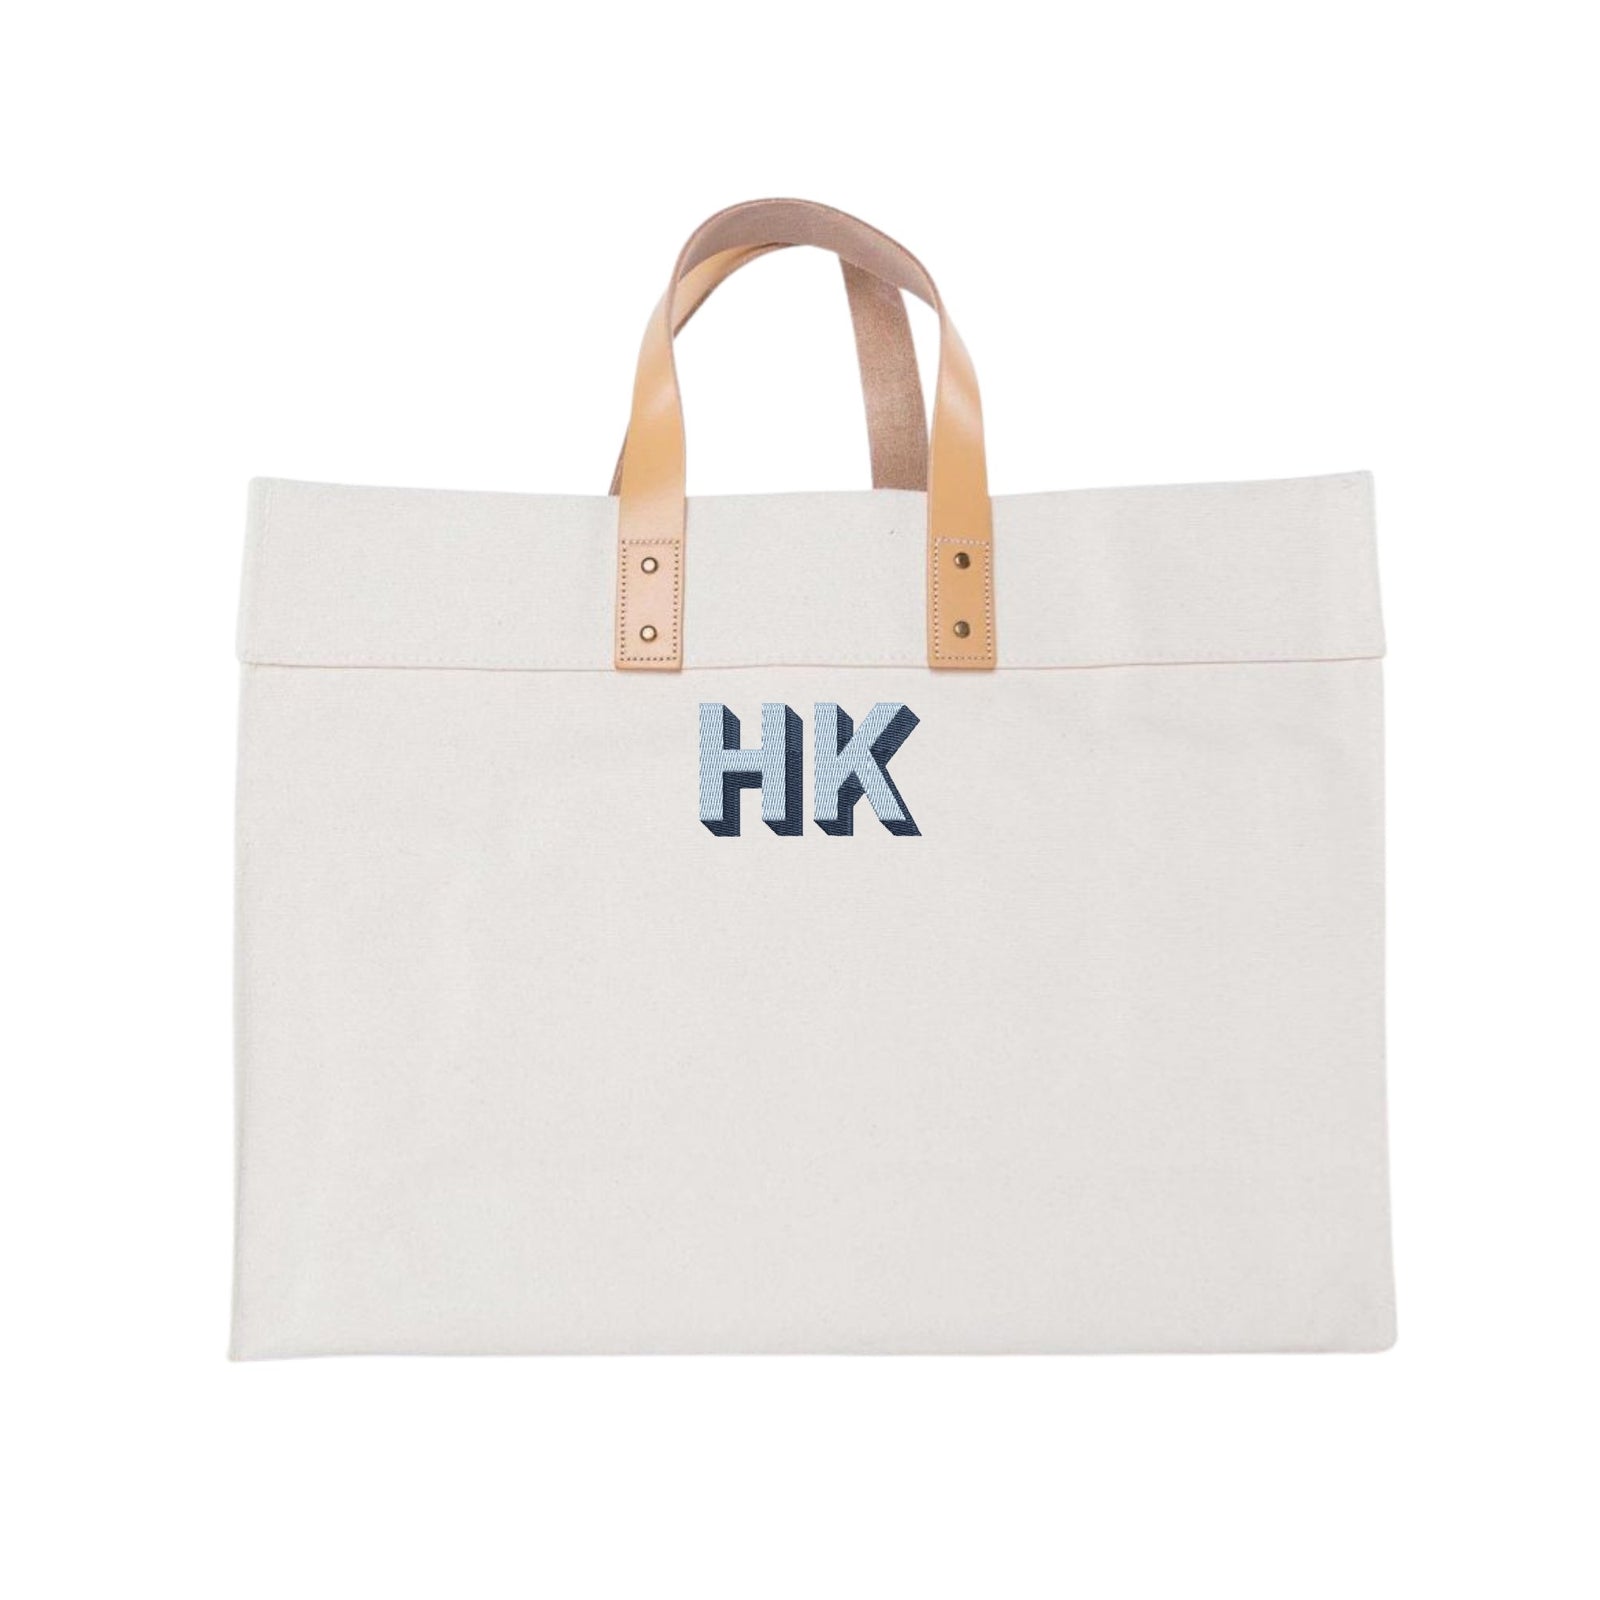 Name Meaning Monogram Personalized Large Canvas Tote Bag